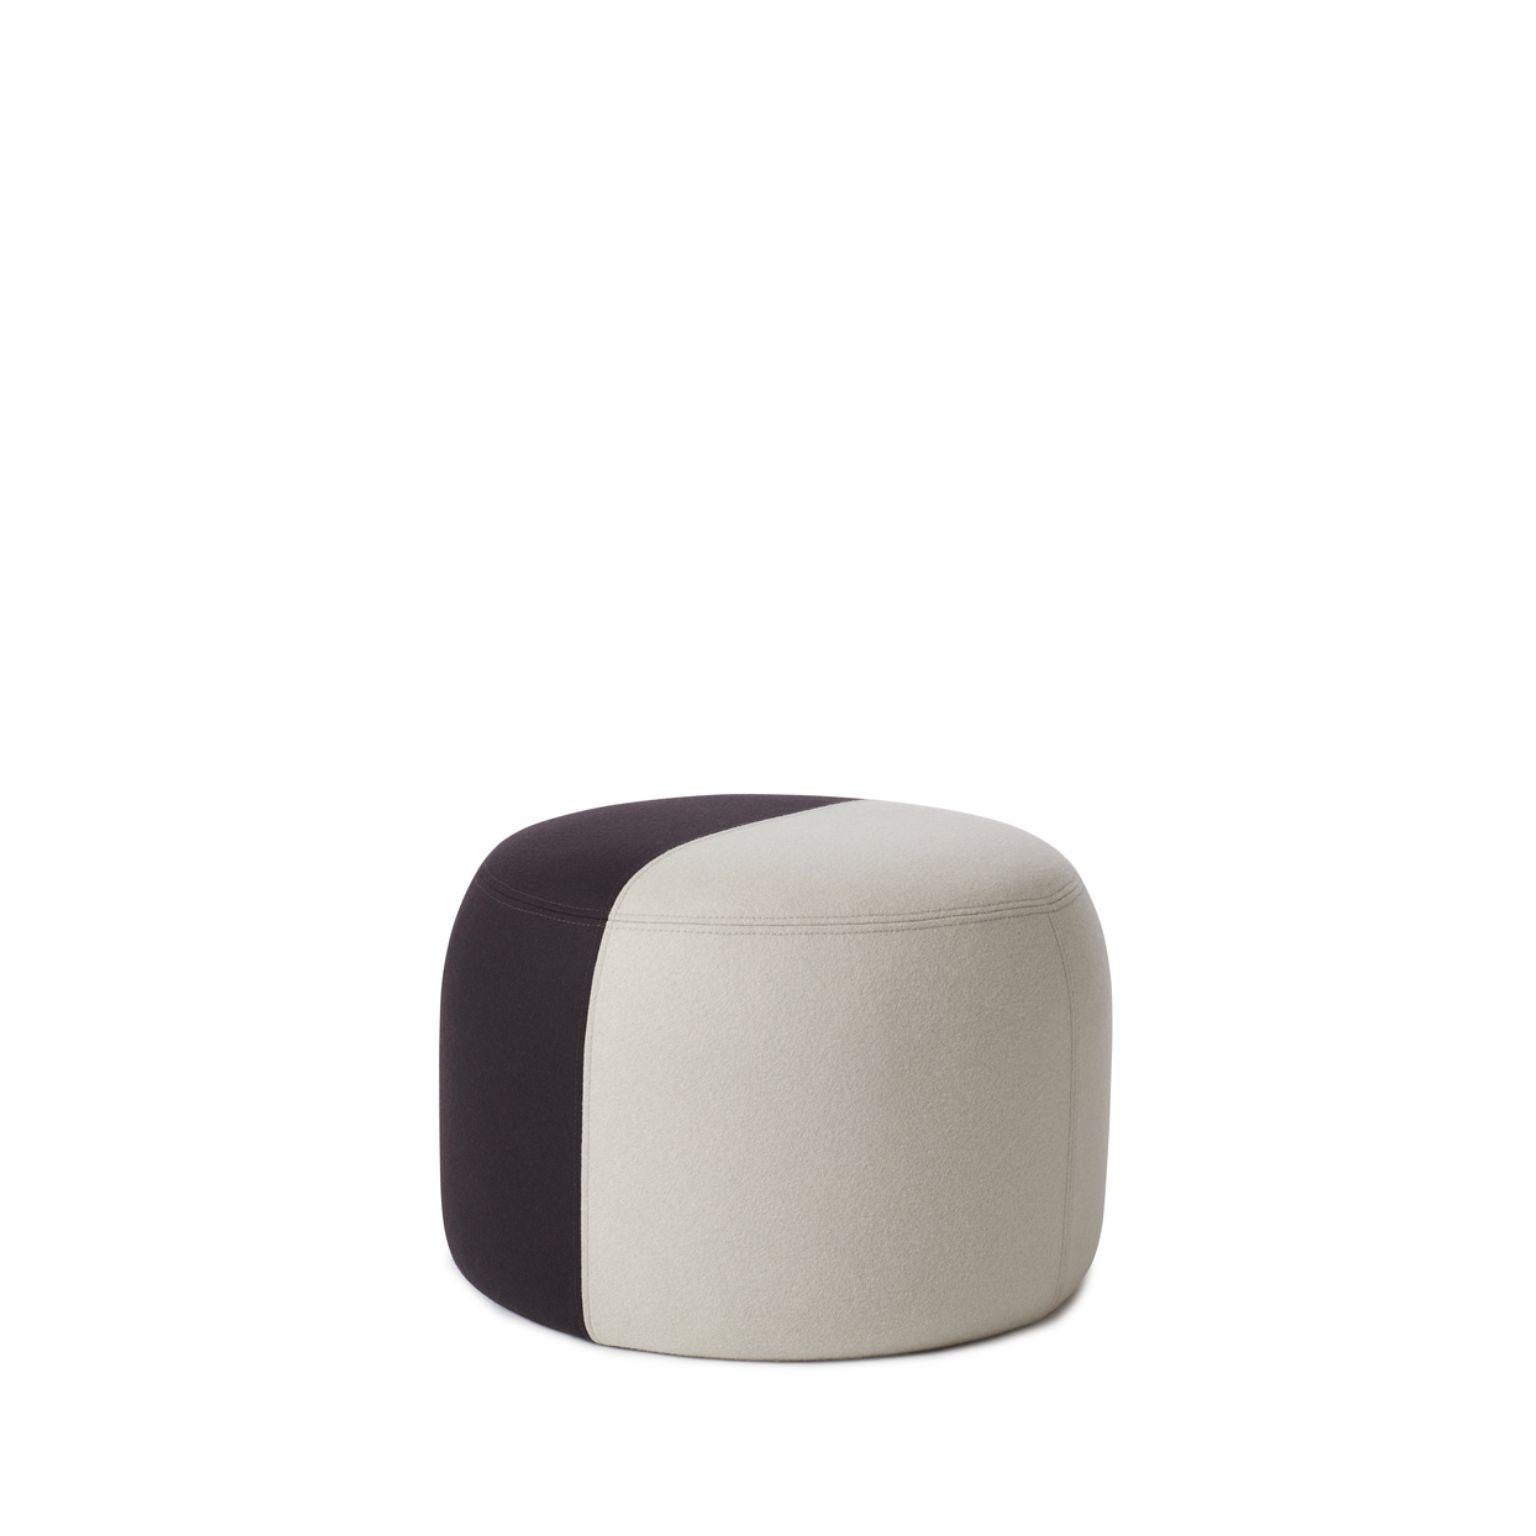 Dainty Pouf Pearl grey black by Warm Nordic
Dimensions: D 55 x H 39 cm
Material: Textile upholstery, Wooden frame, foam.
Weight: 9.5 kg
Also available in different colours and finishes.

Sophisticated, two-coloured pouf with soft shapes and a